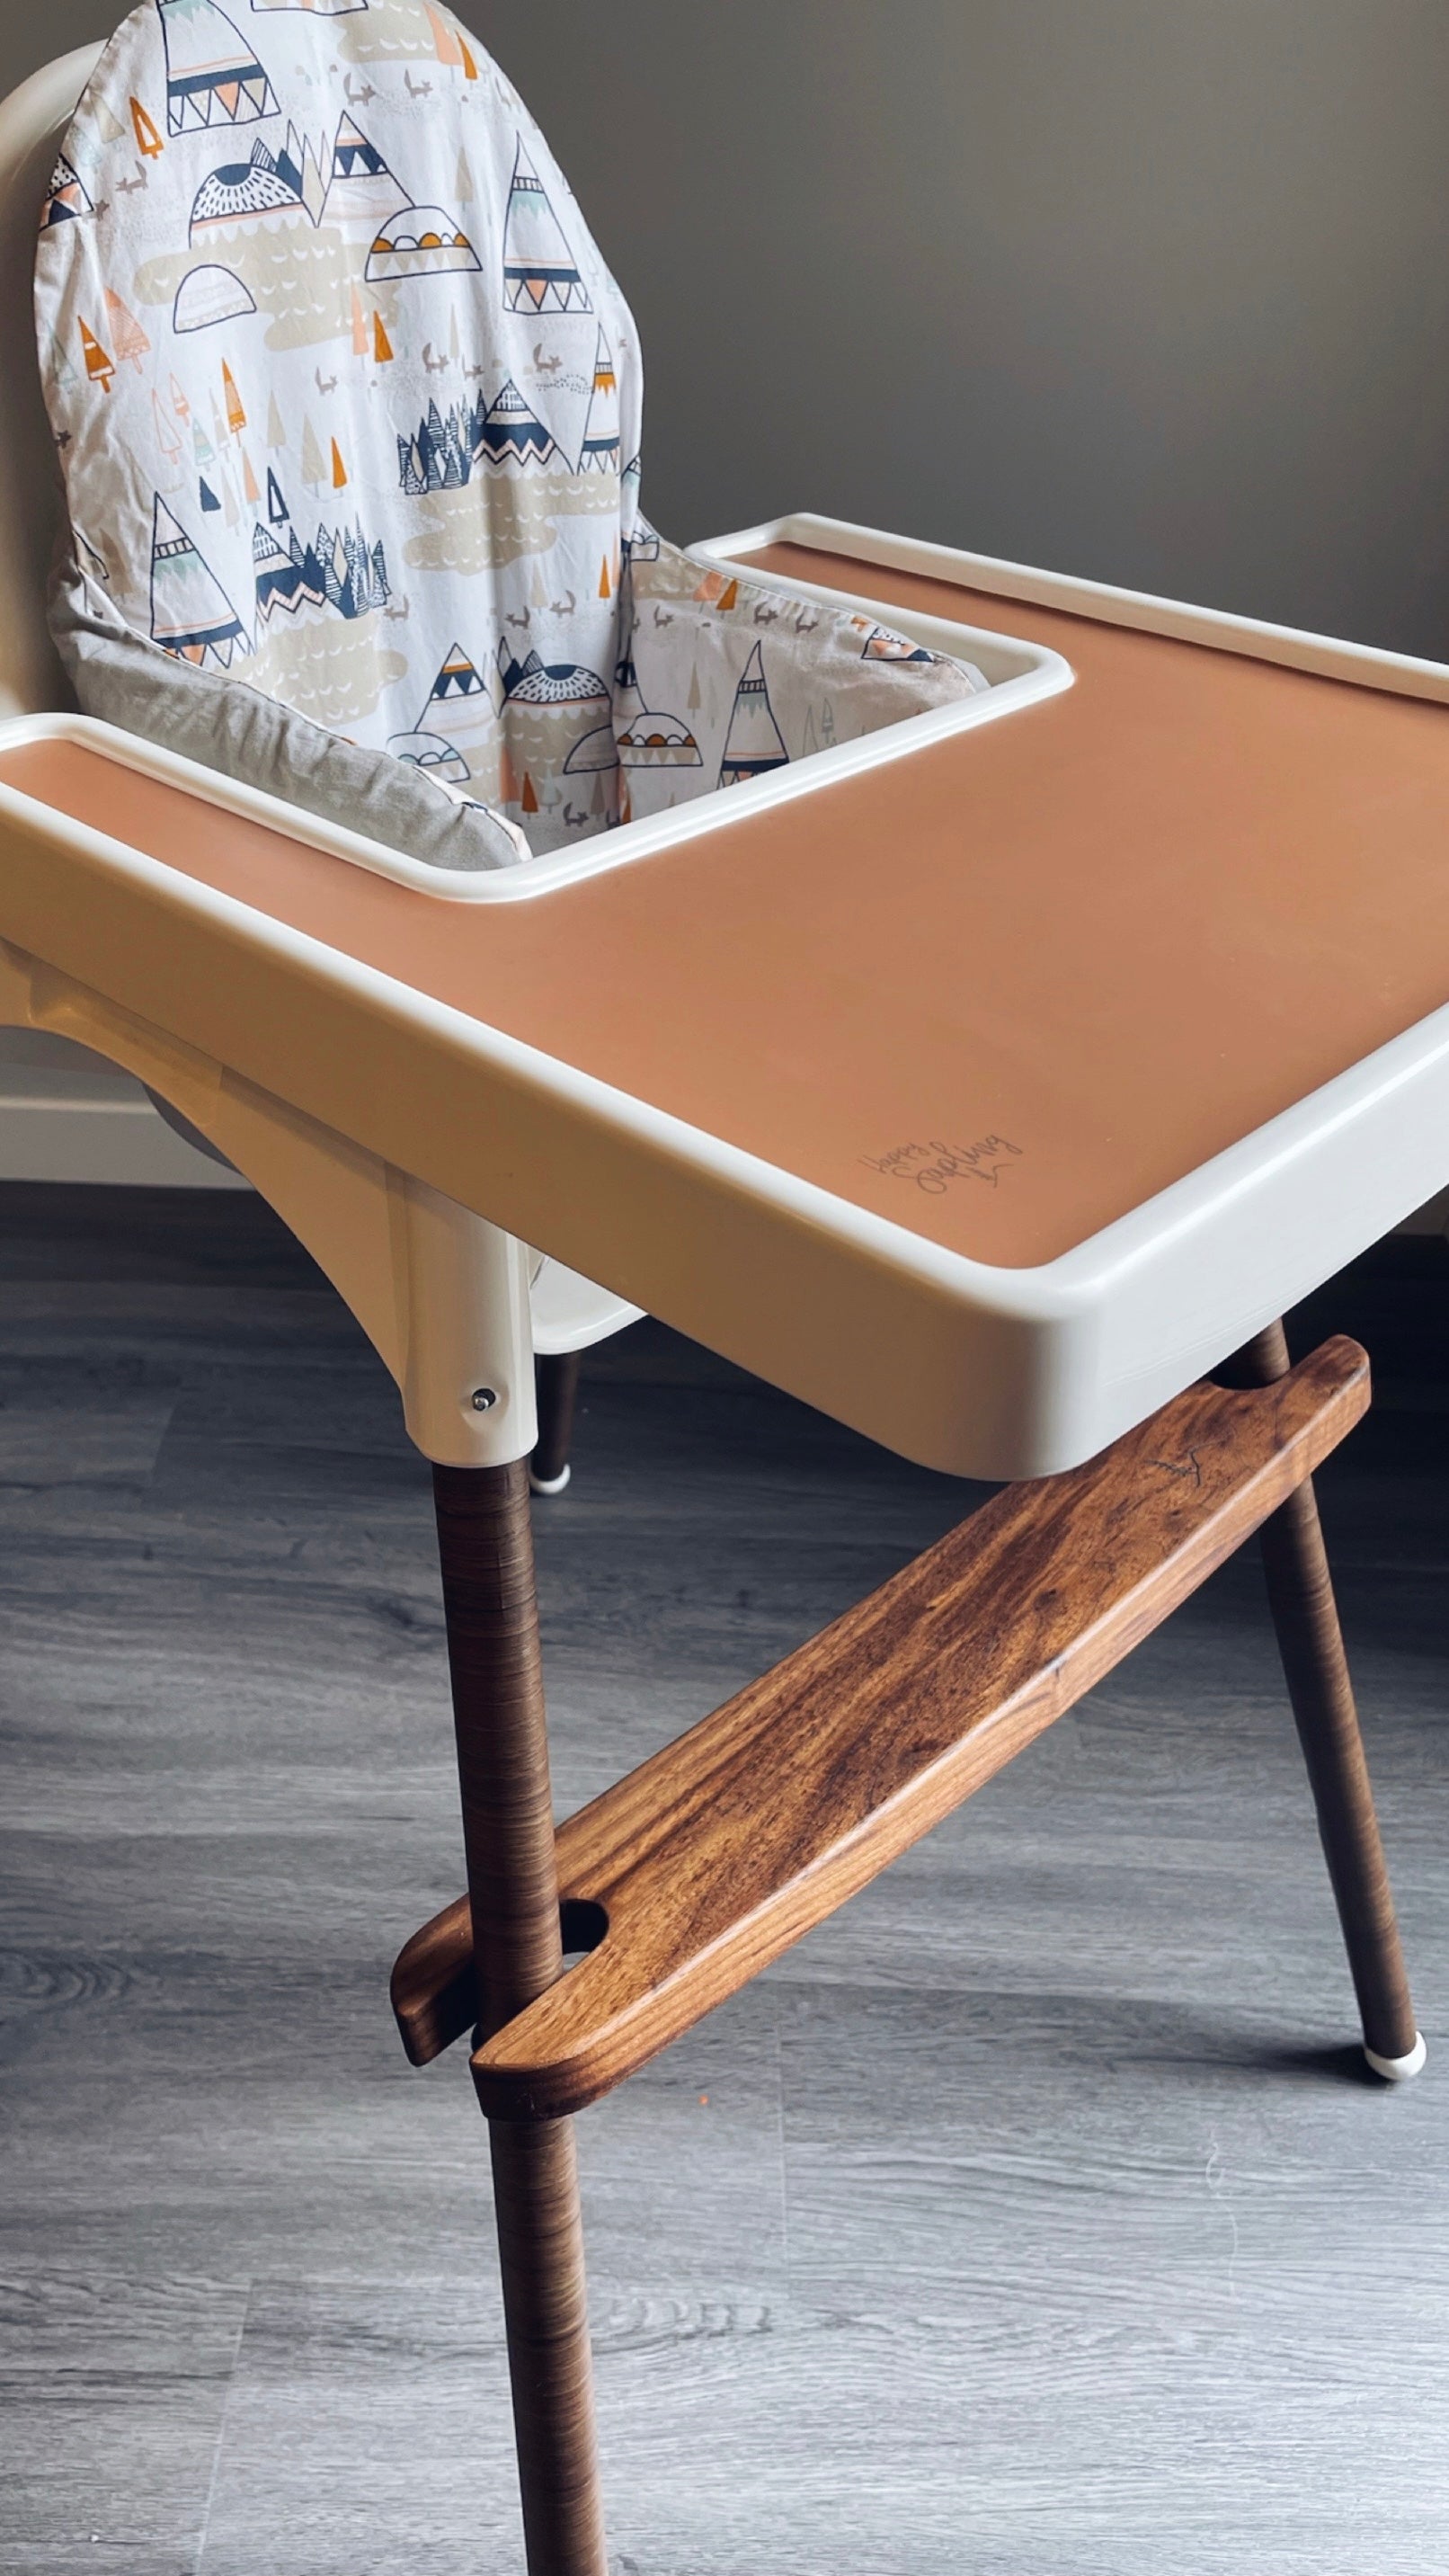 Clay Ikea High Chair Placemat